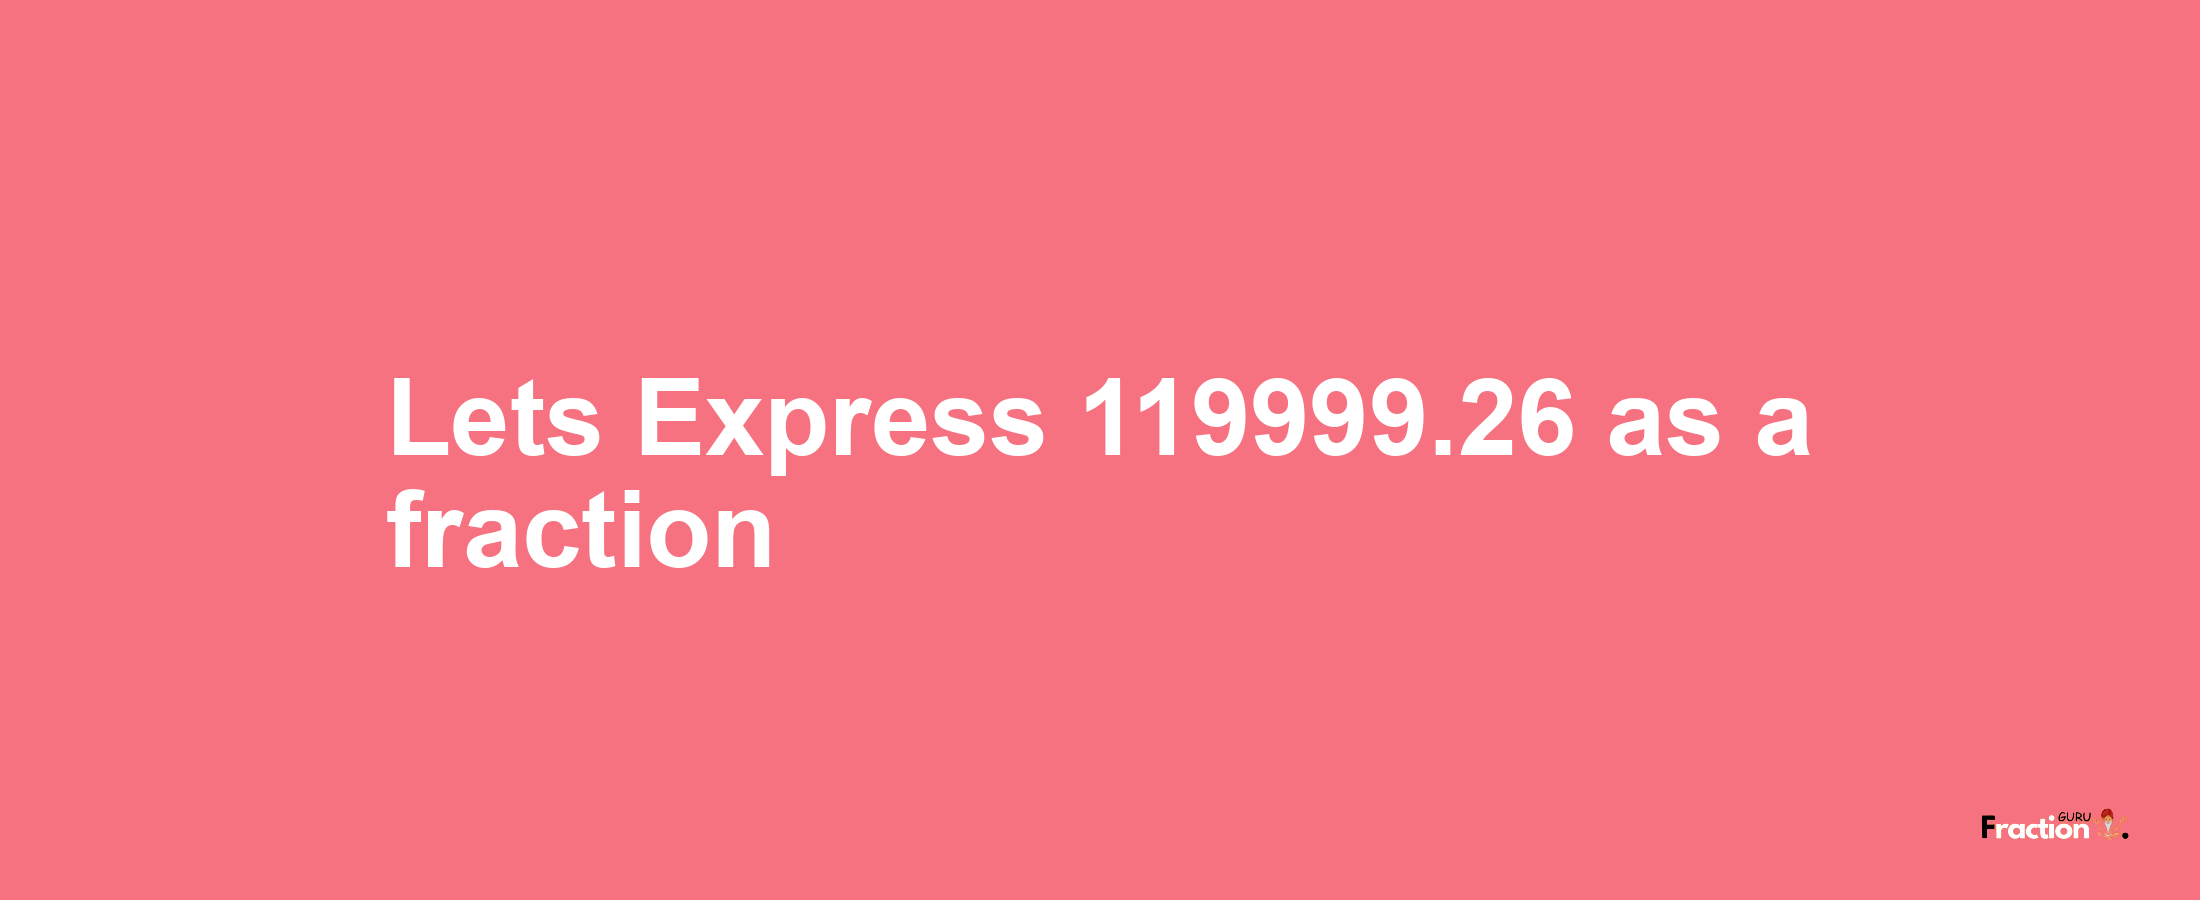 Lets Express 119999.26 as afraction